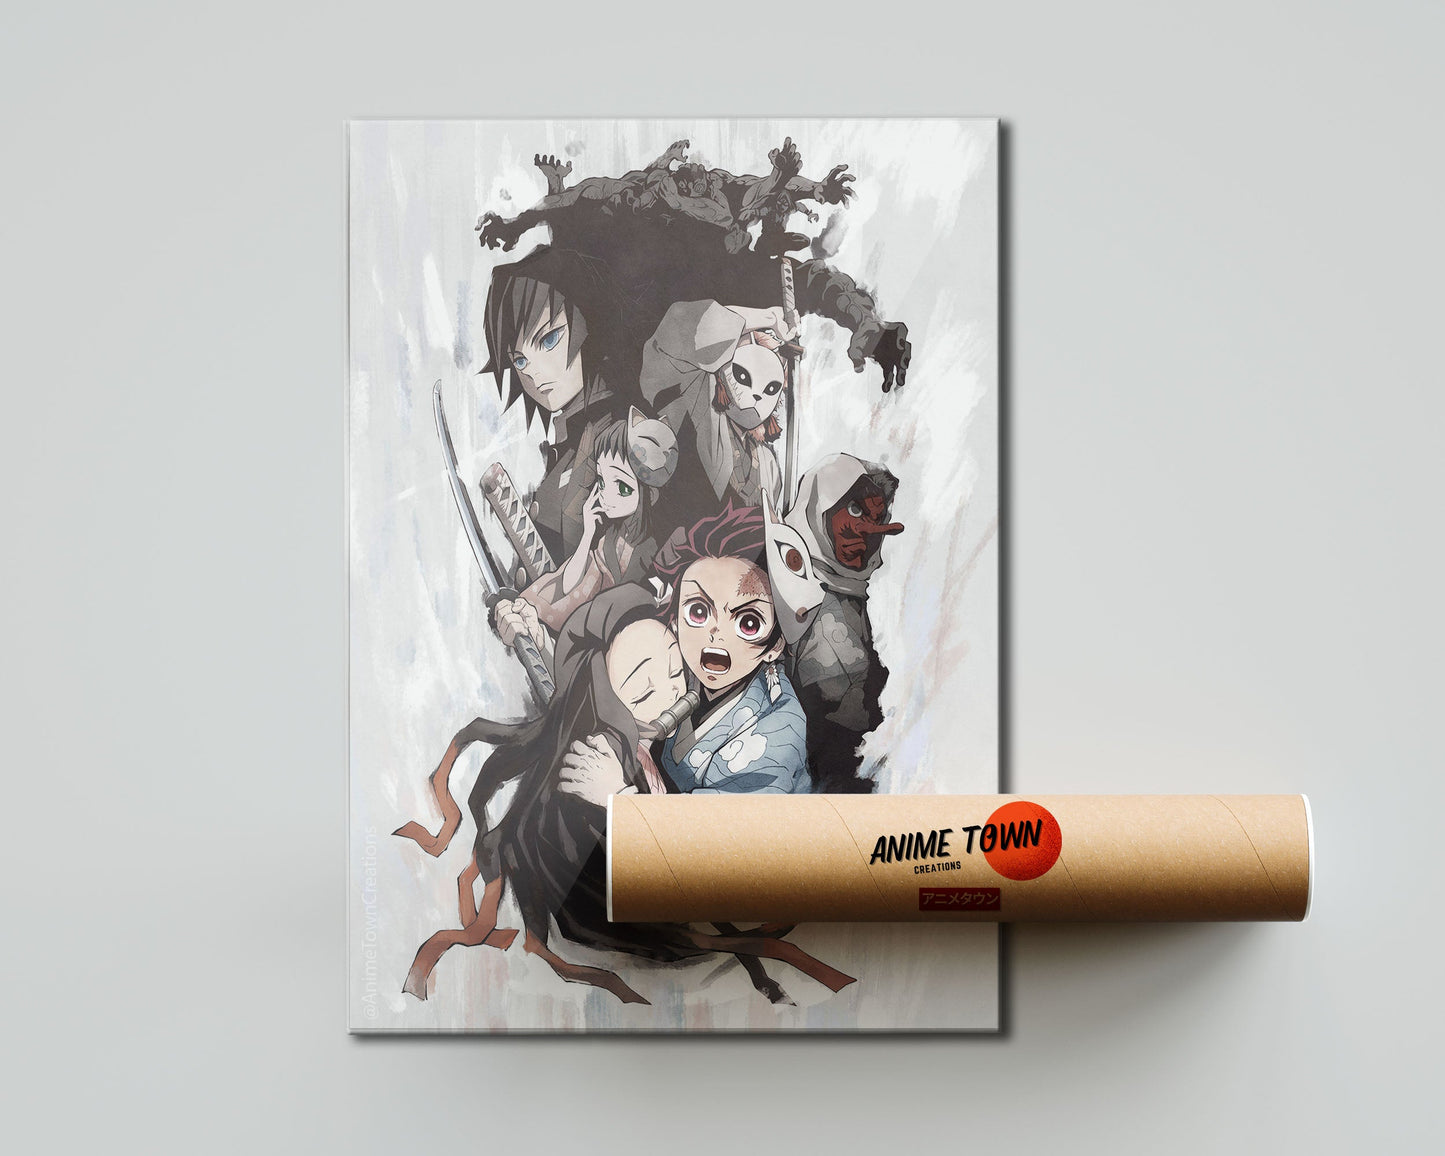 Anime Town Creations Poster Demon Slayer Cover 5" x 7" Home Goods - Anime Demon Slayer Poster